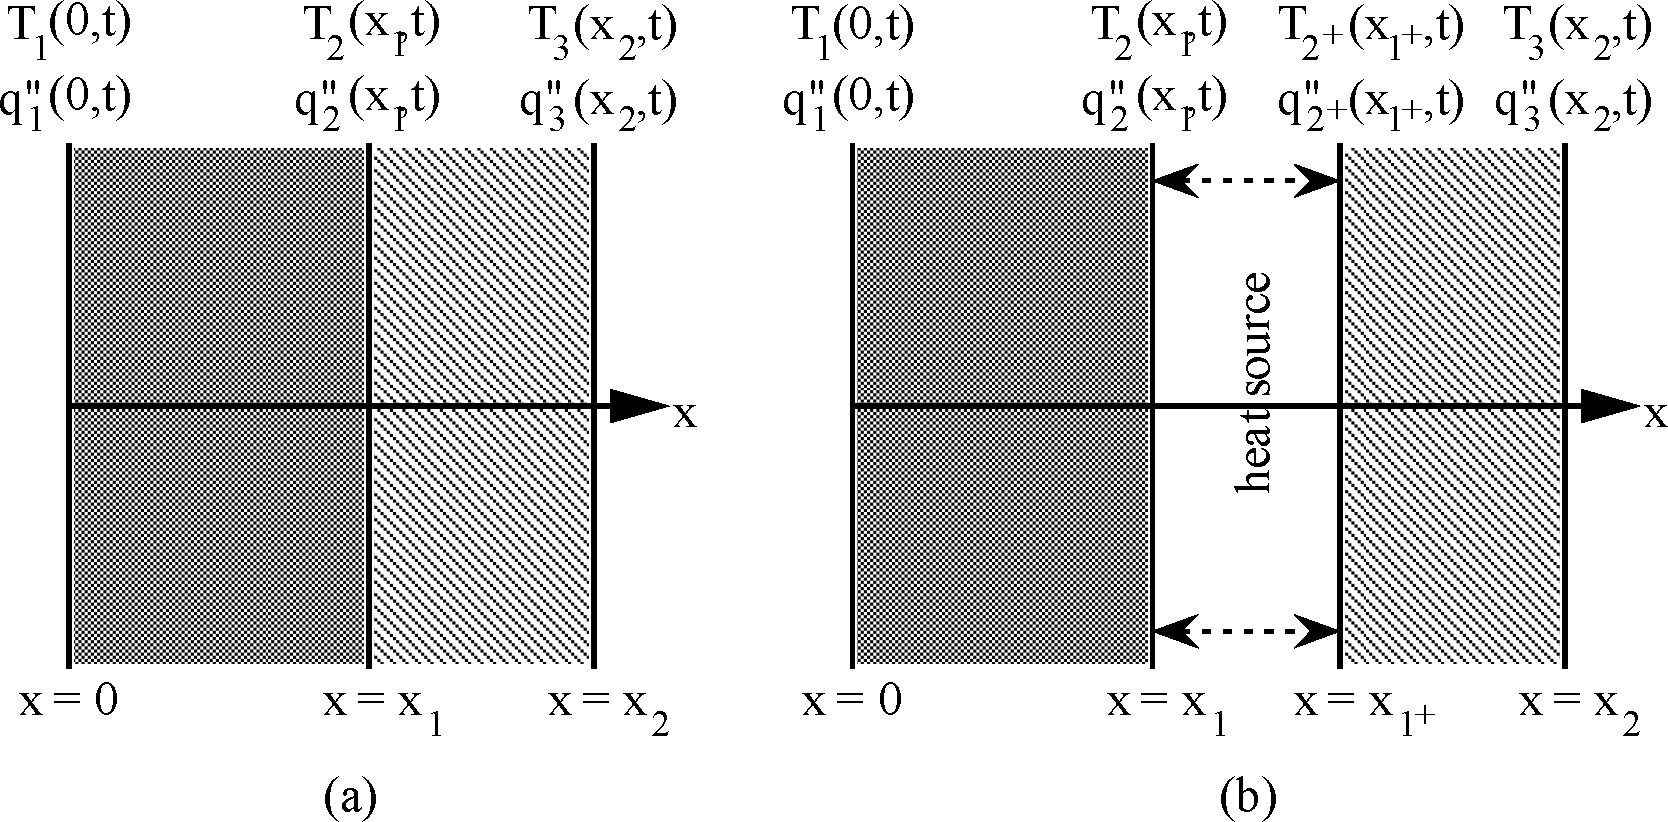 Two Layer Example for Deriving the Laplace Transform Extension to Include Sources and Sinks [fig:two-layer-example-for-deriving-the-laplace-transform-extension]